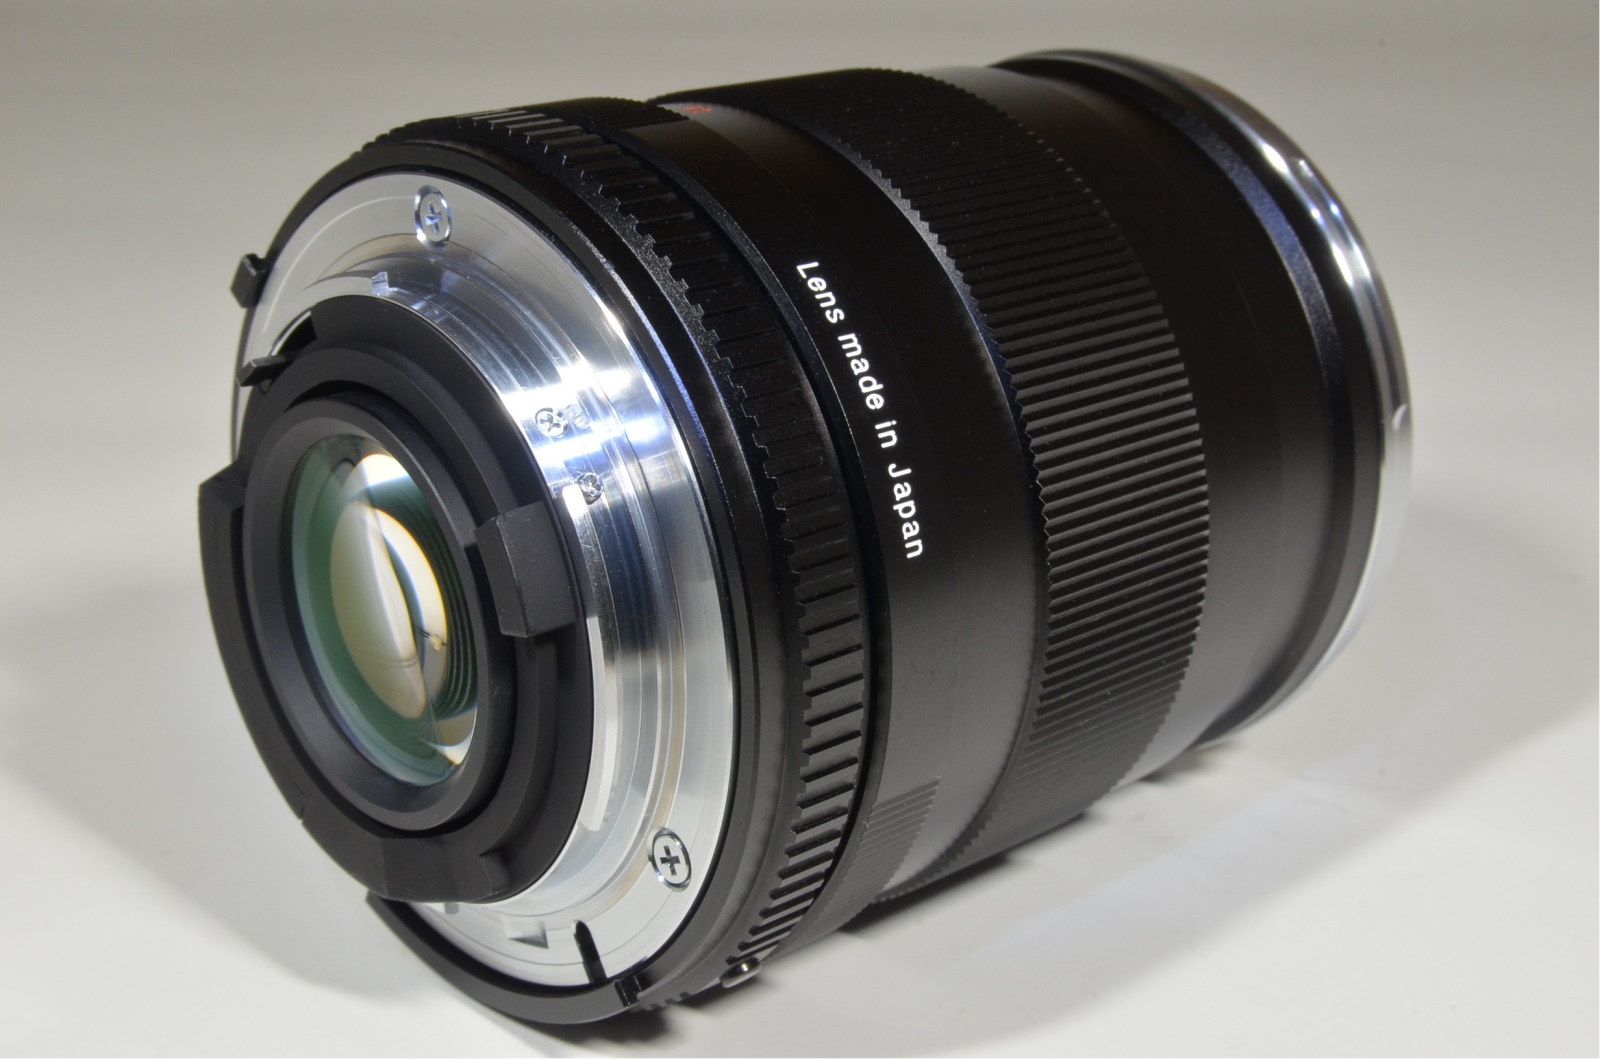 carl zeiss distagon t* 35mm f2 zf.2 for nikon